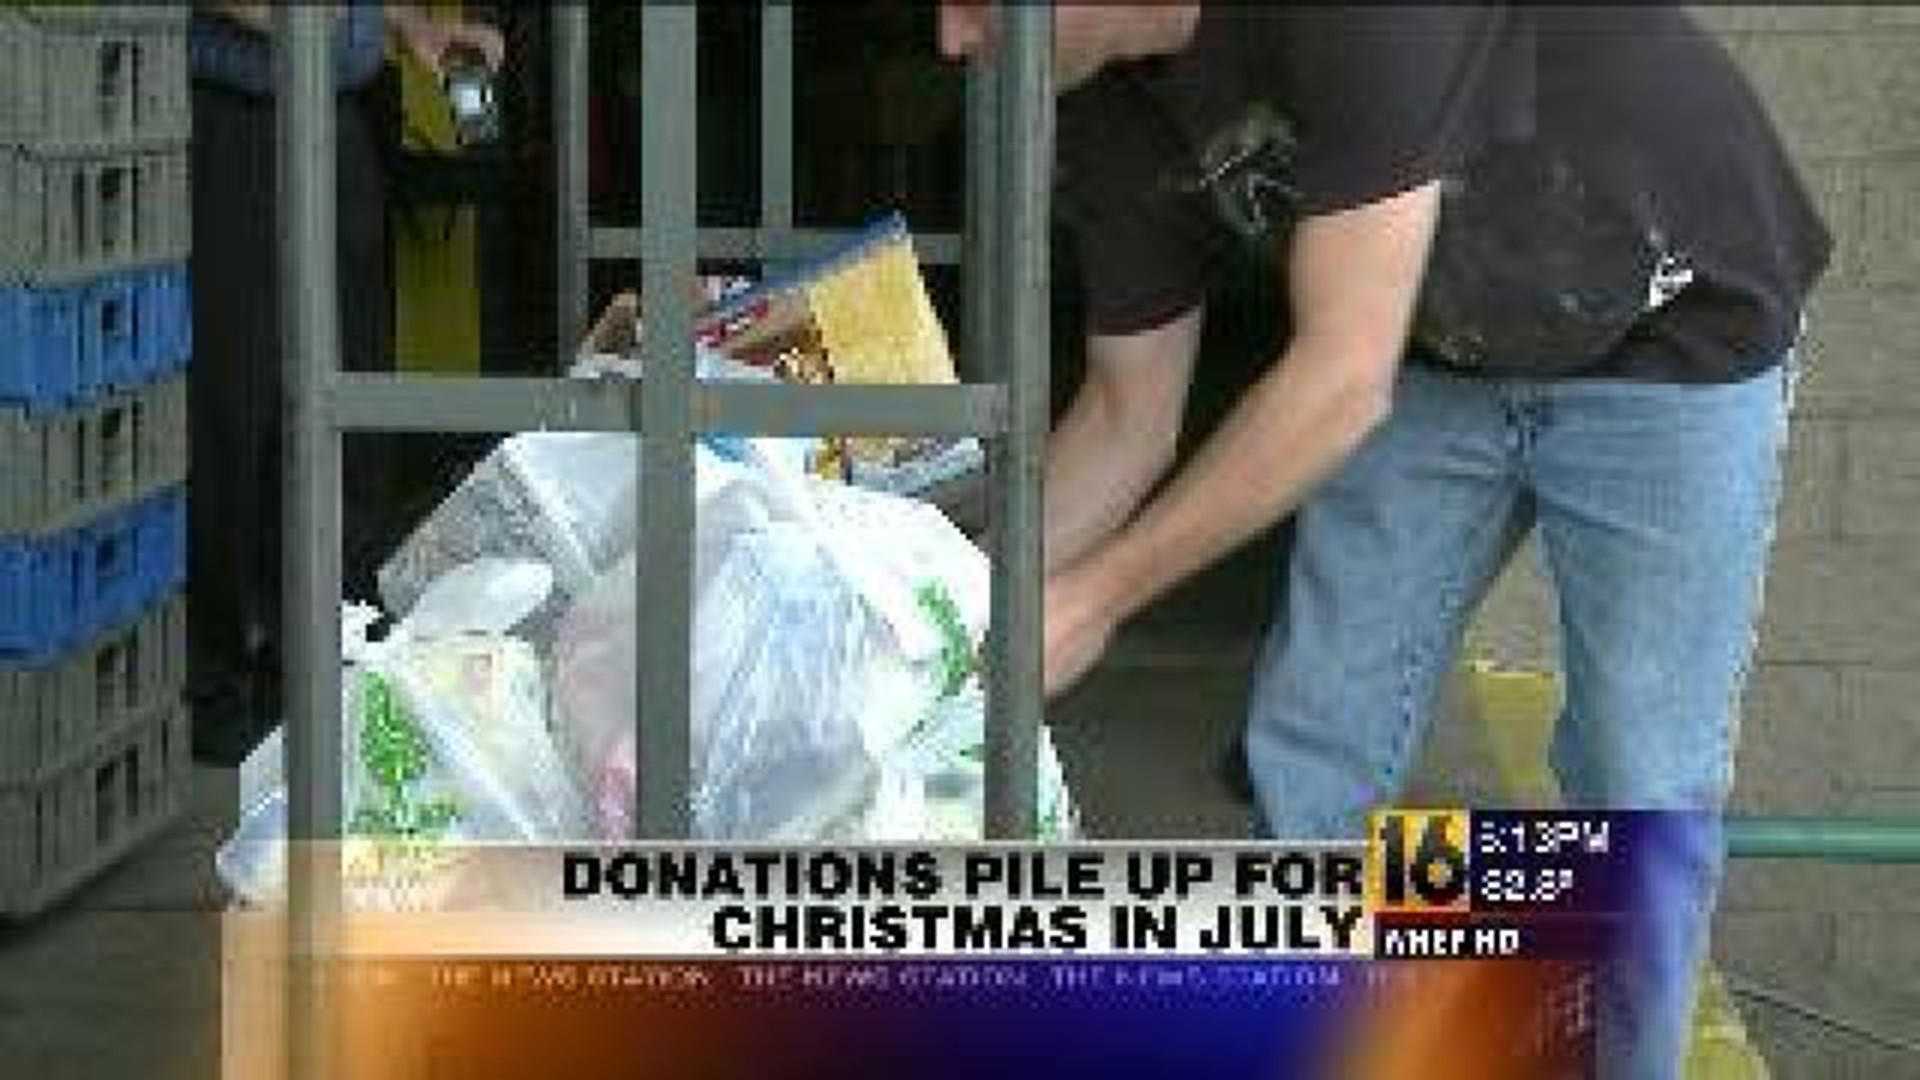 Donations Pile Up for Christmas in July